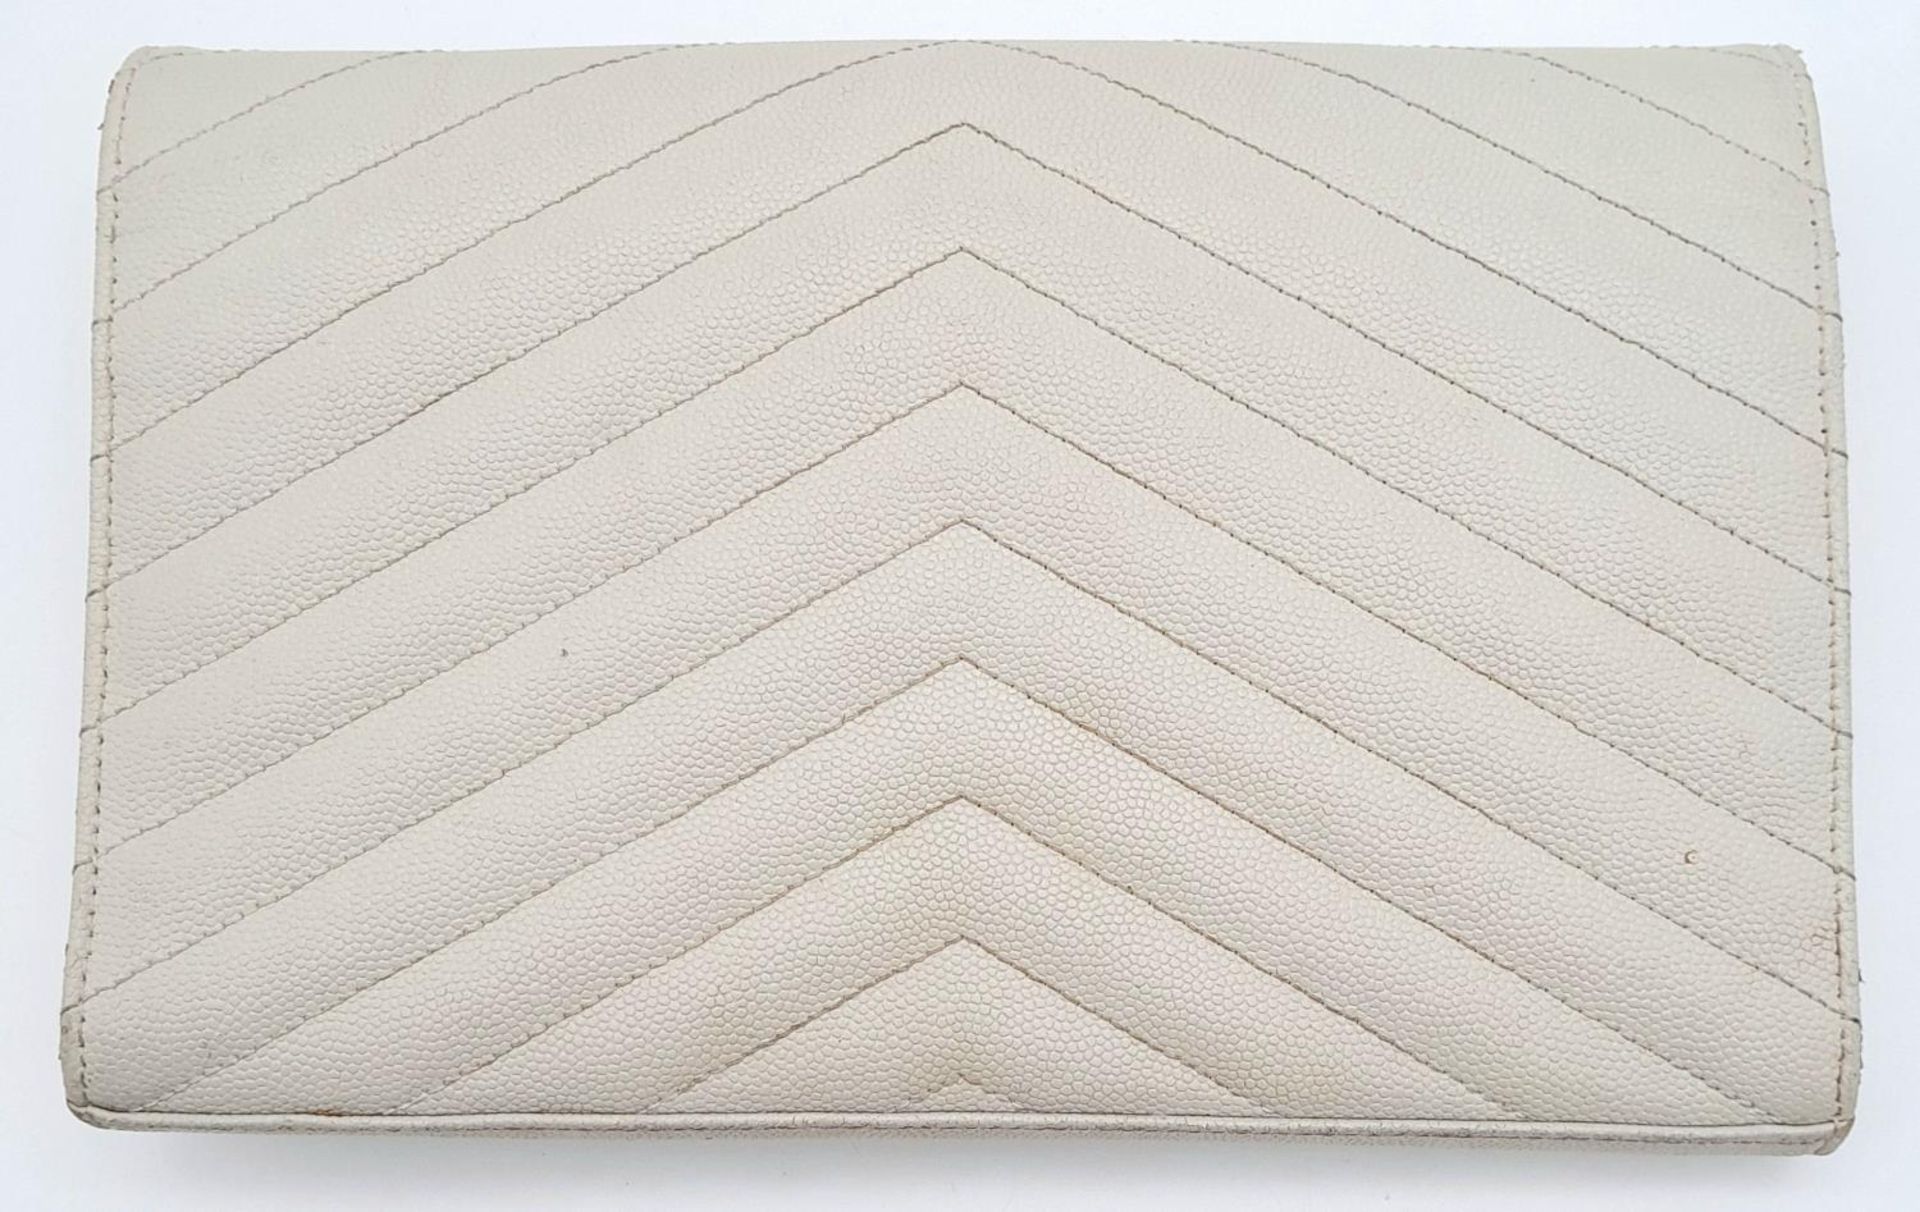 A YSL Ivory Cassandre Wallet Bag. Leather exterior with gold-toned hardware, the iconic YSL logo, - Bild 2 aus 13